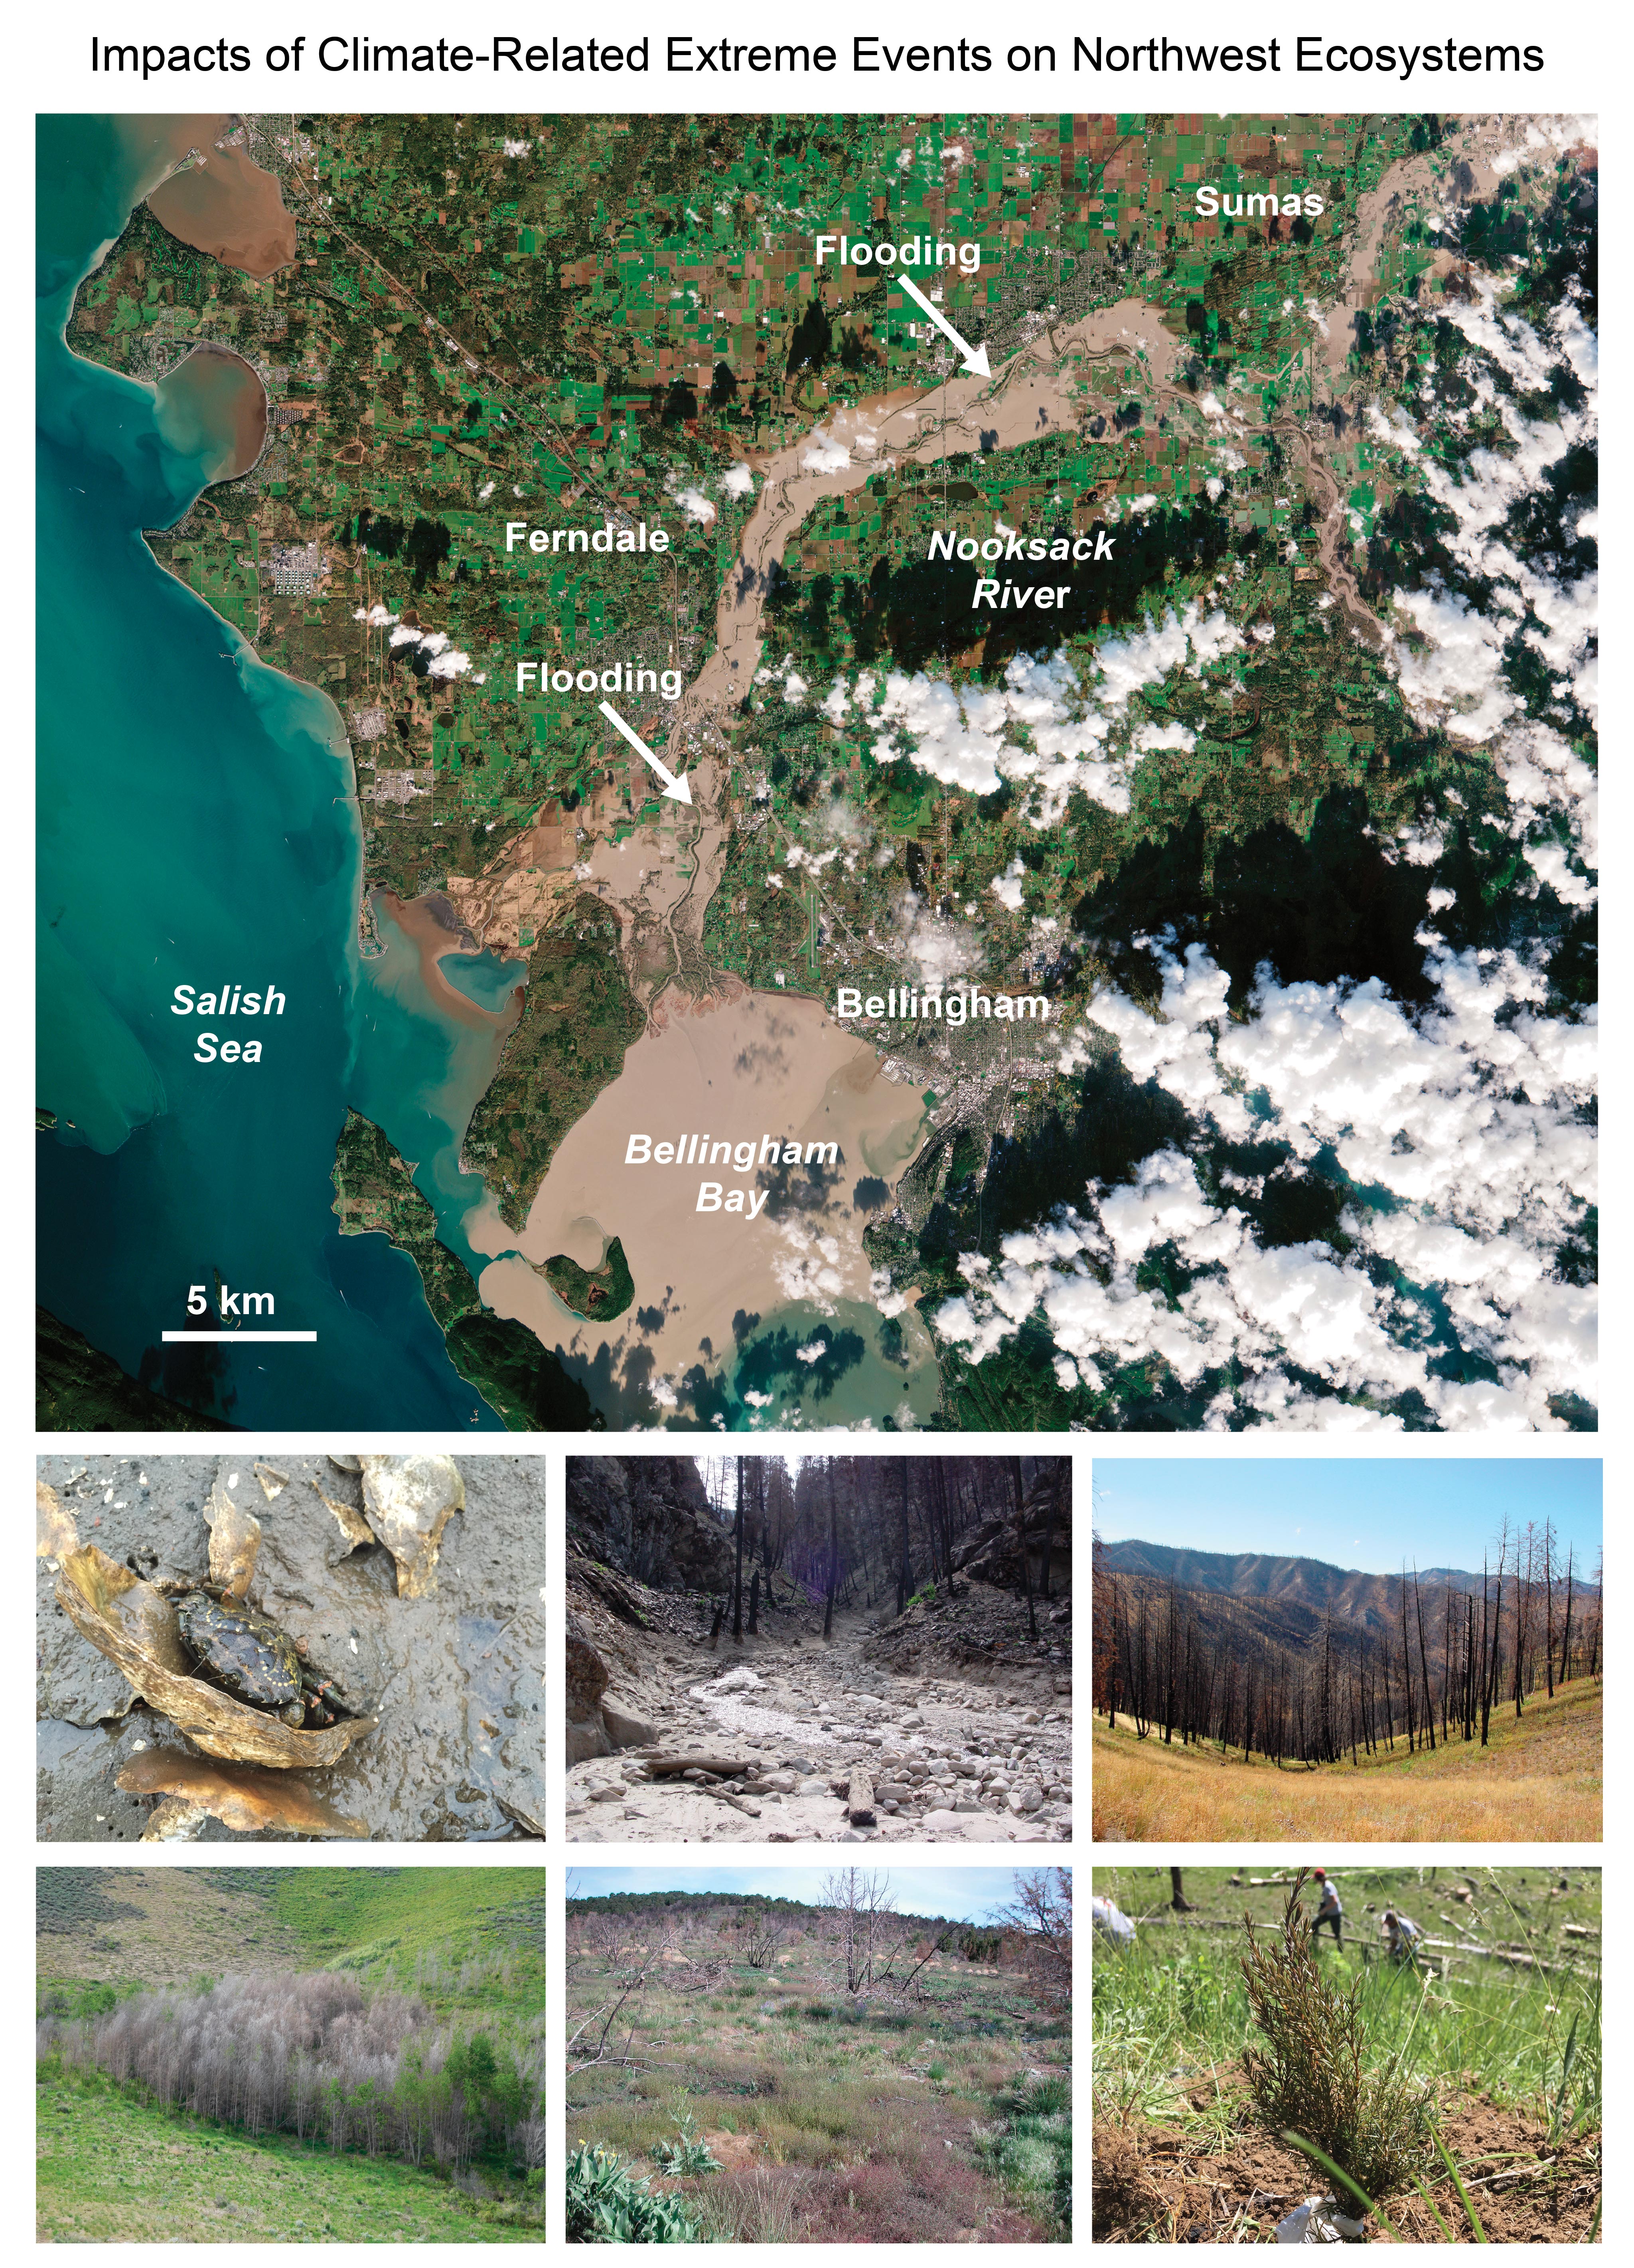 Climate-Related Impacts and Extreme Events to Northwest Ecosystems